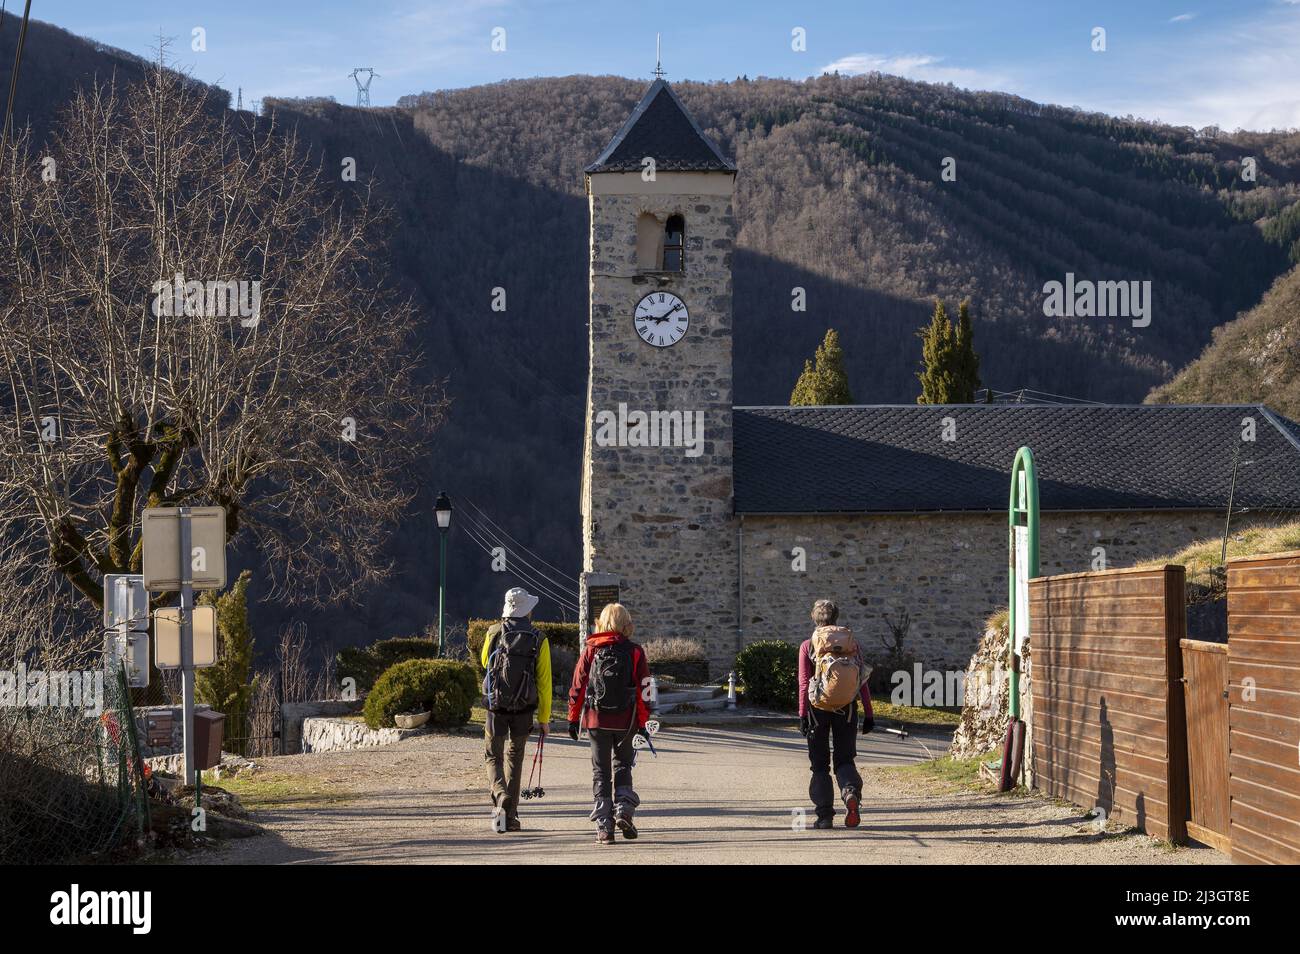 France, Ariege, Pyrenees massif, Tarascon sur Ariege, the church of Genat, departure of hikes and 3 hikers Stock Photo